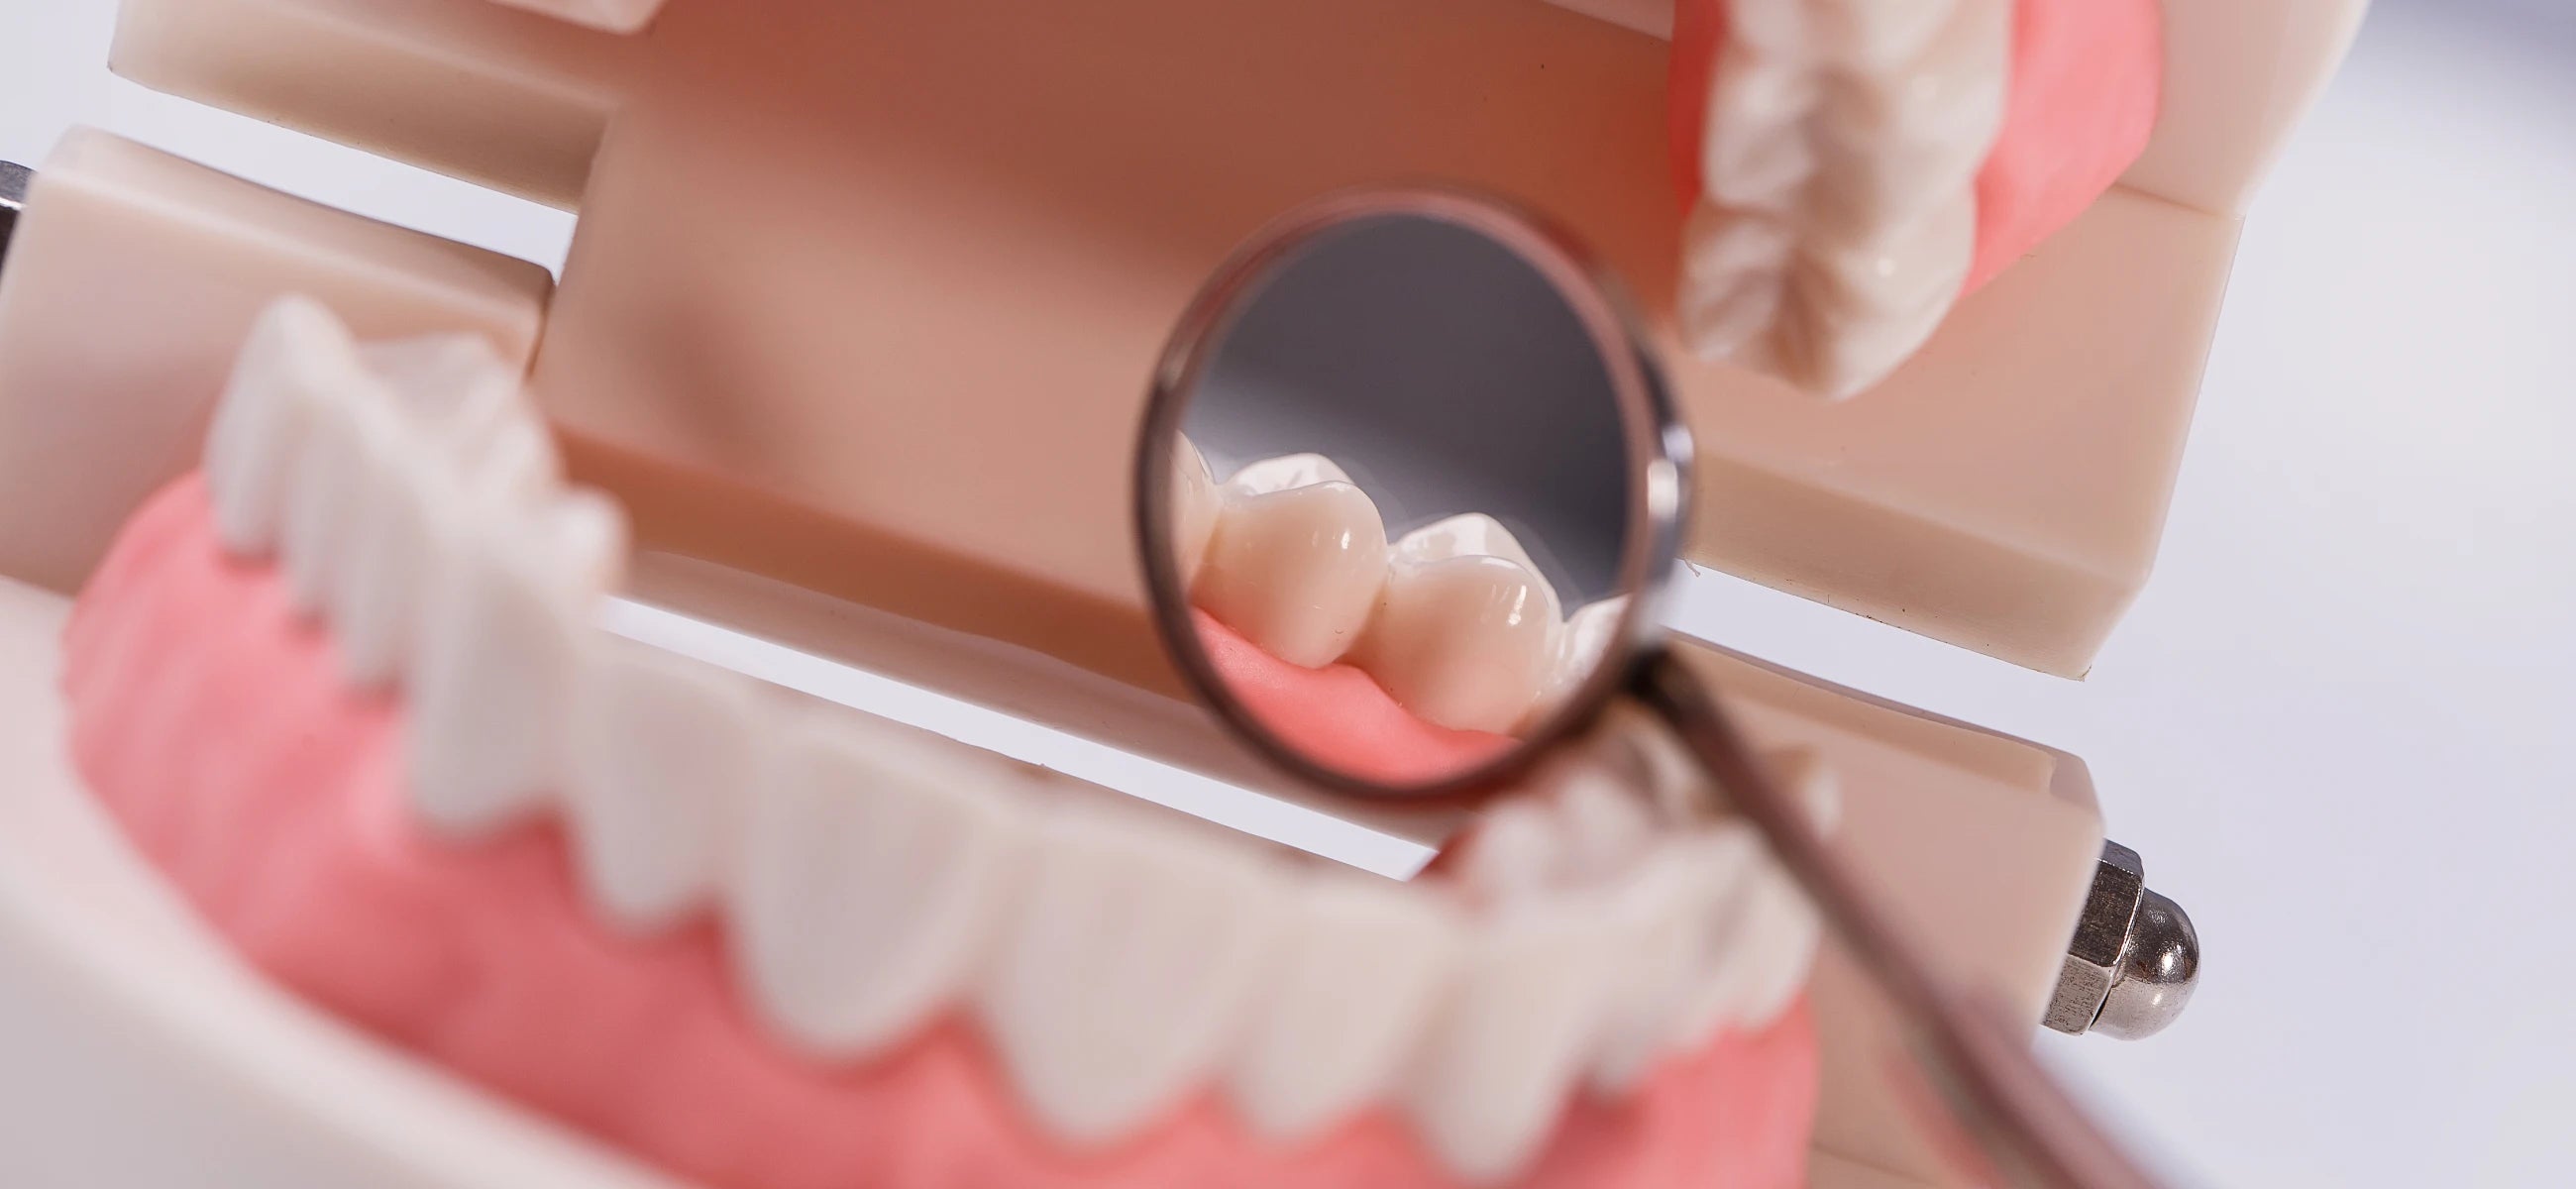 Endodontics explained: What is a root canal?